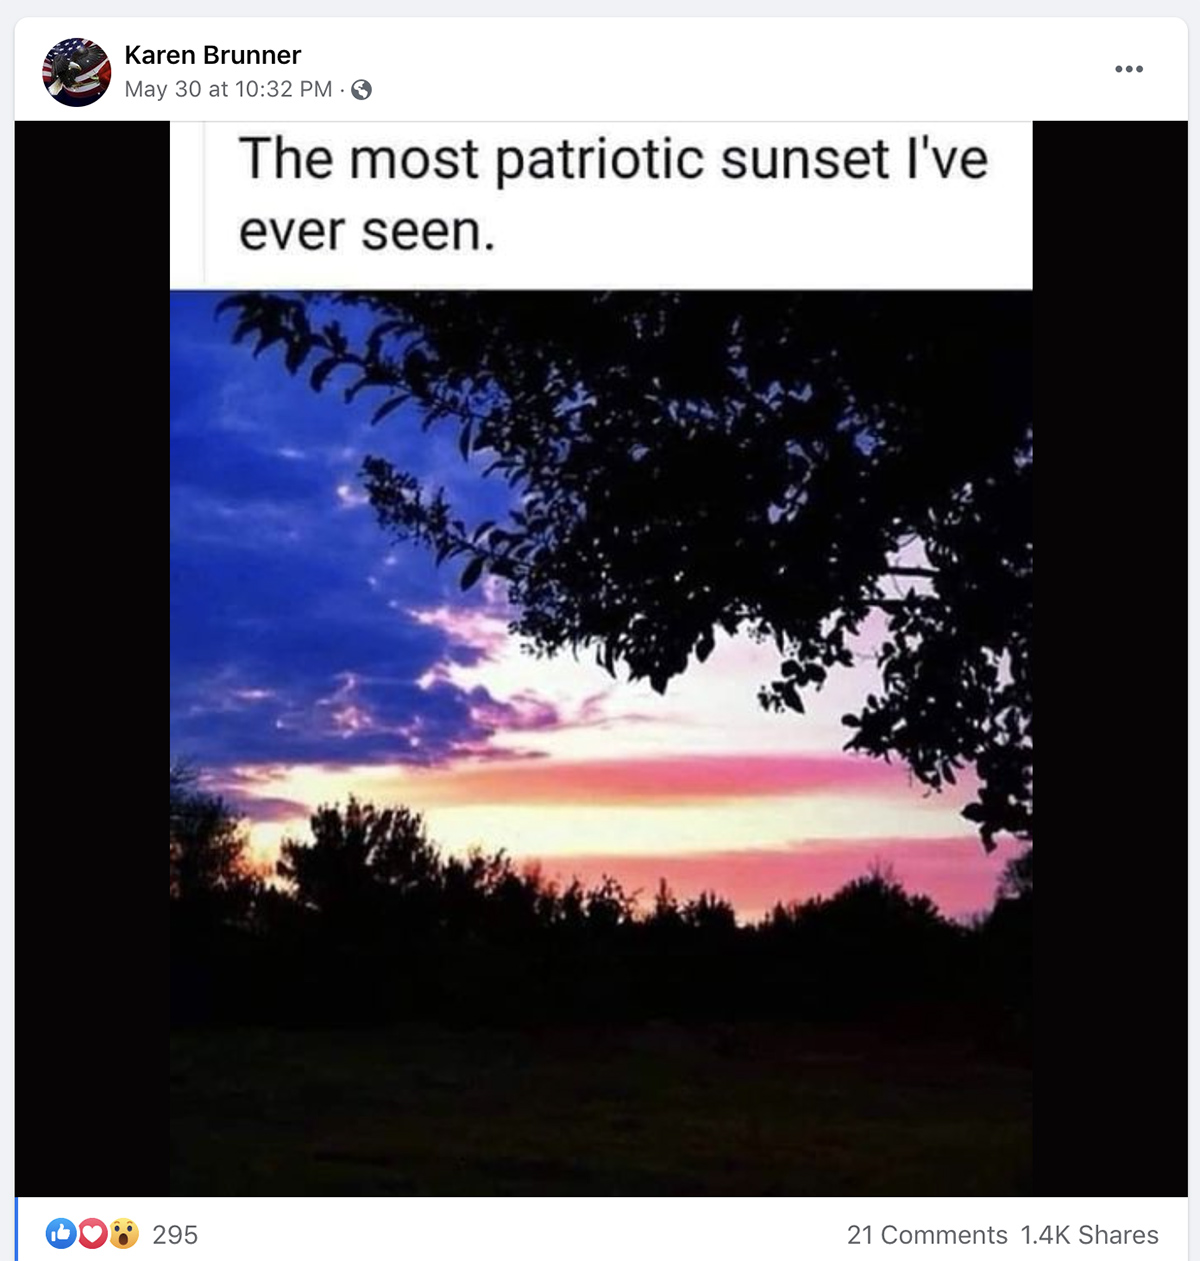 The American flag sunset photo said it was the most patriotic sunset I've ever seen.